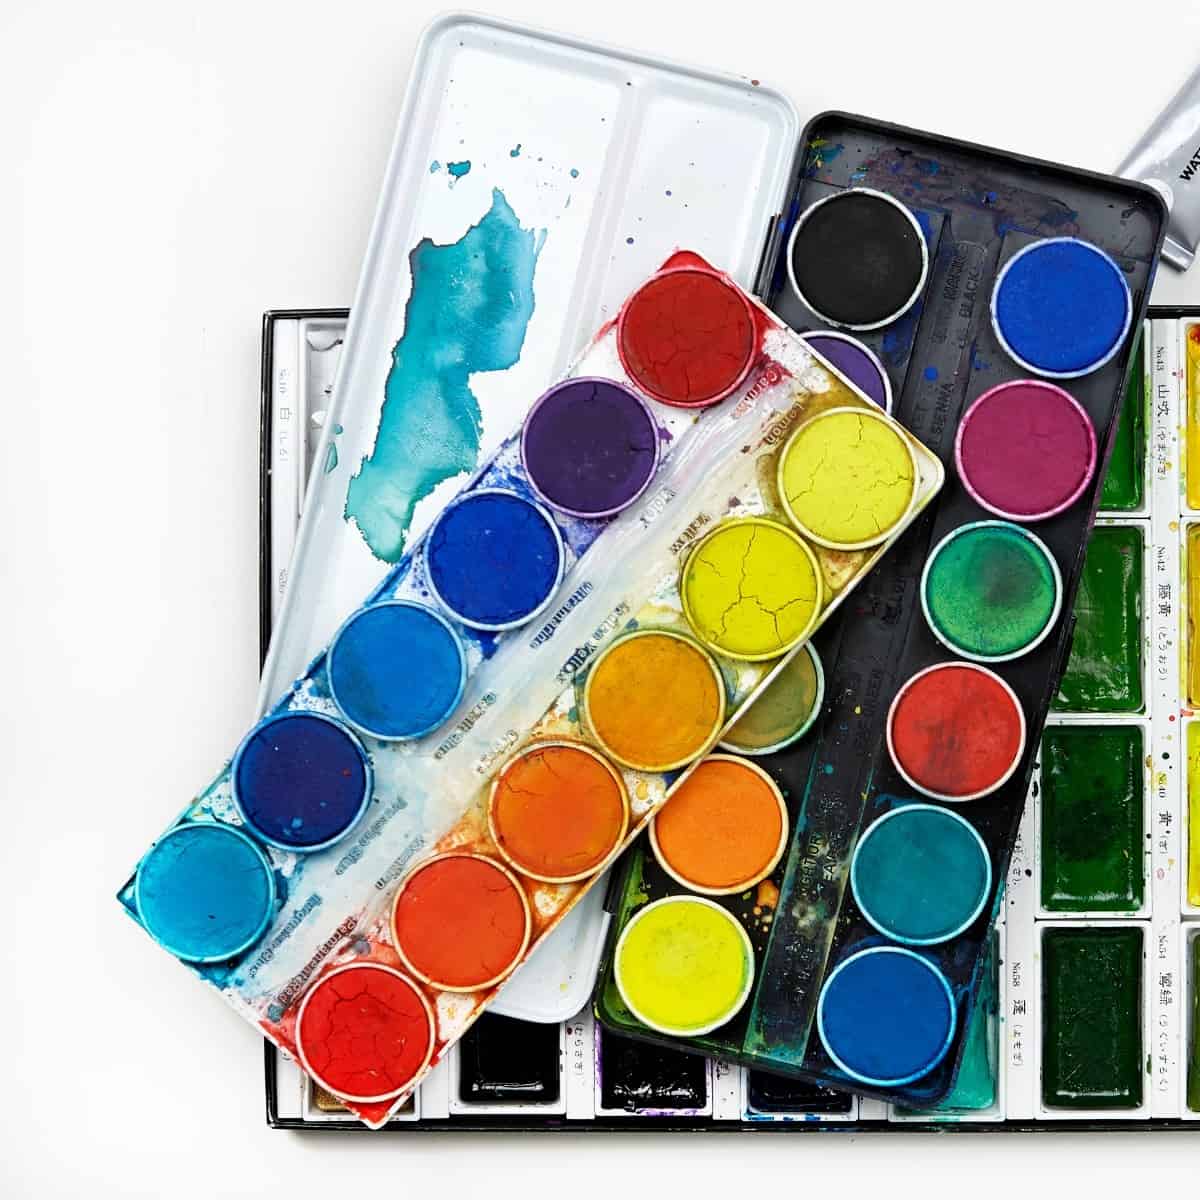 Watercolour Tube or Pan Paints which is the best to use - The